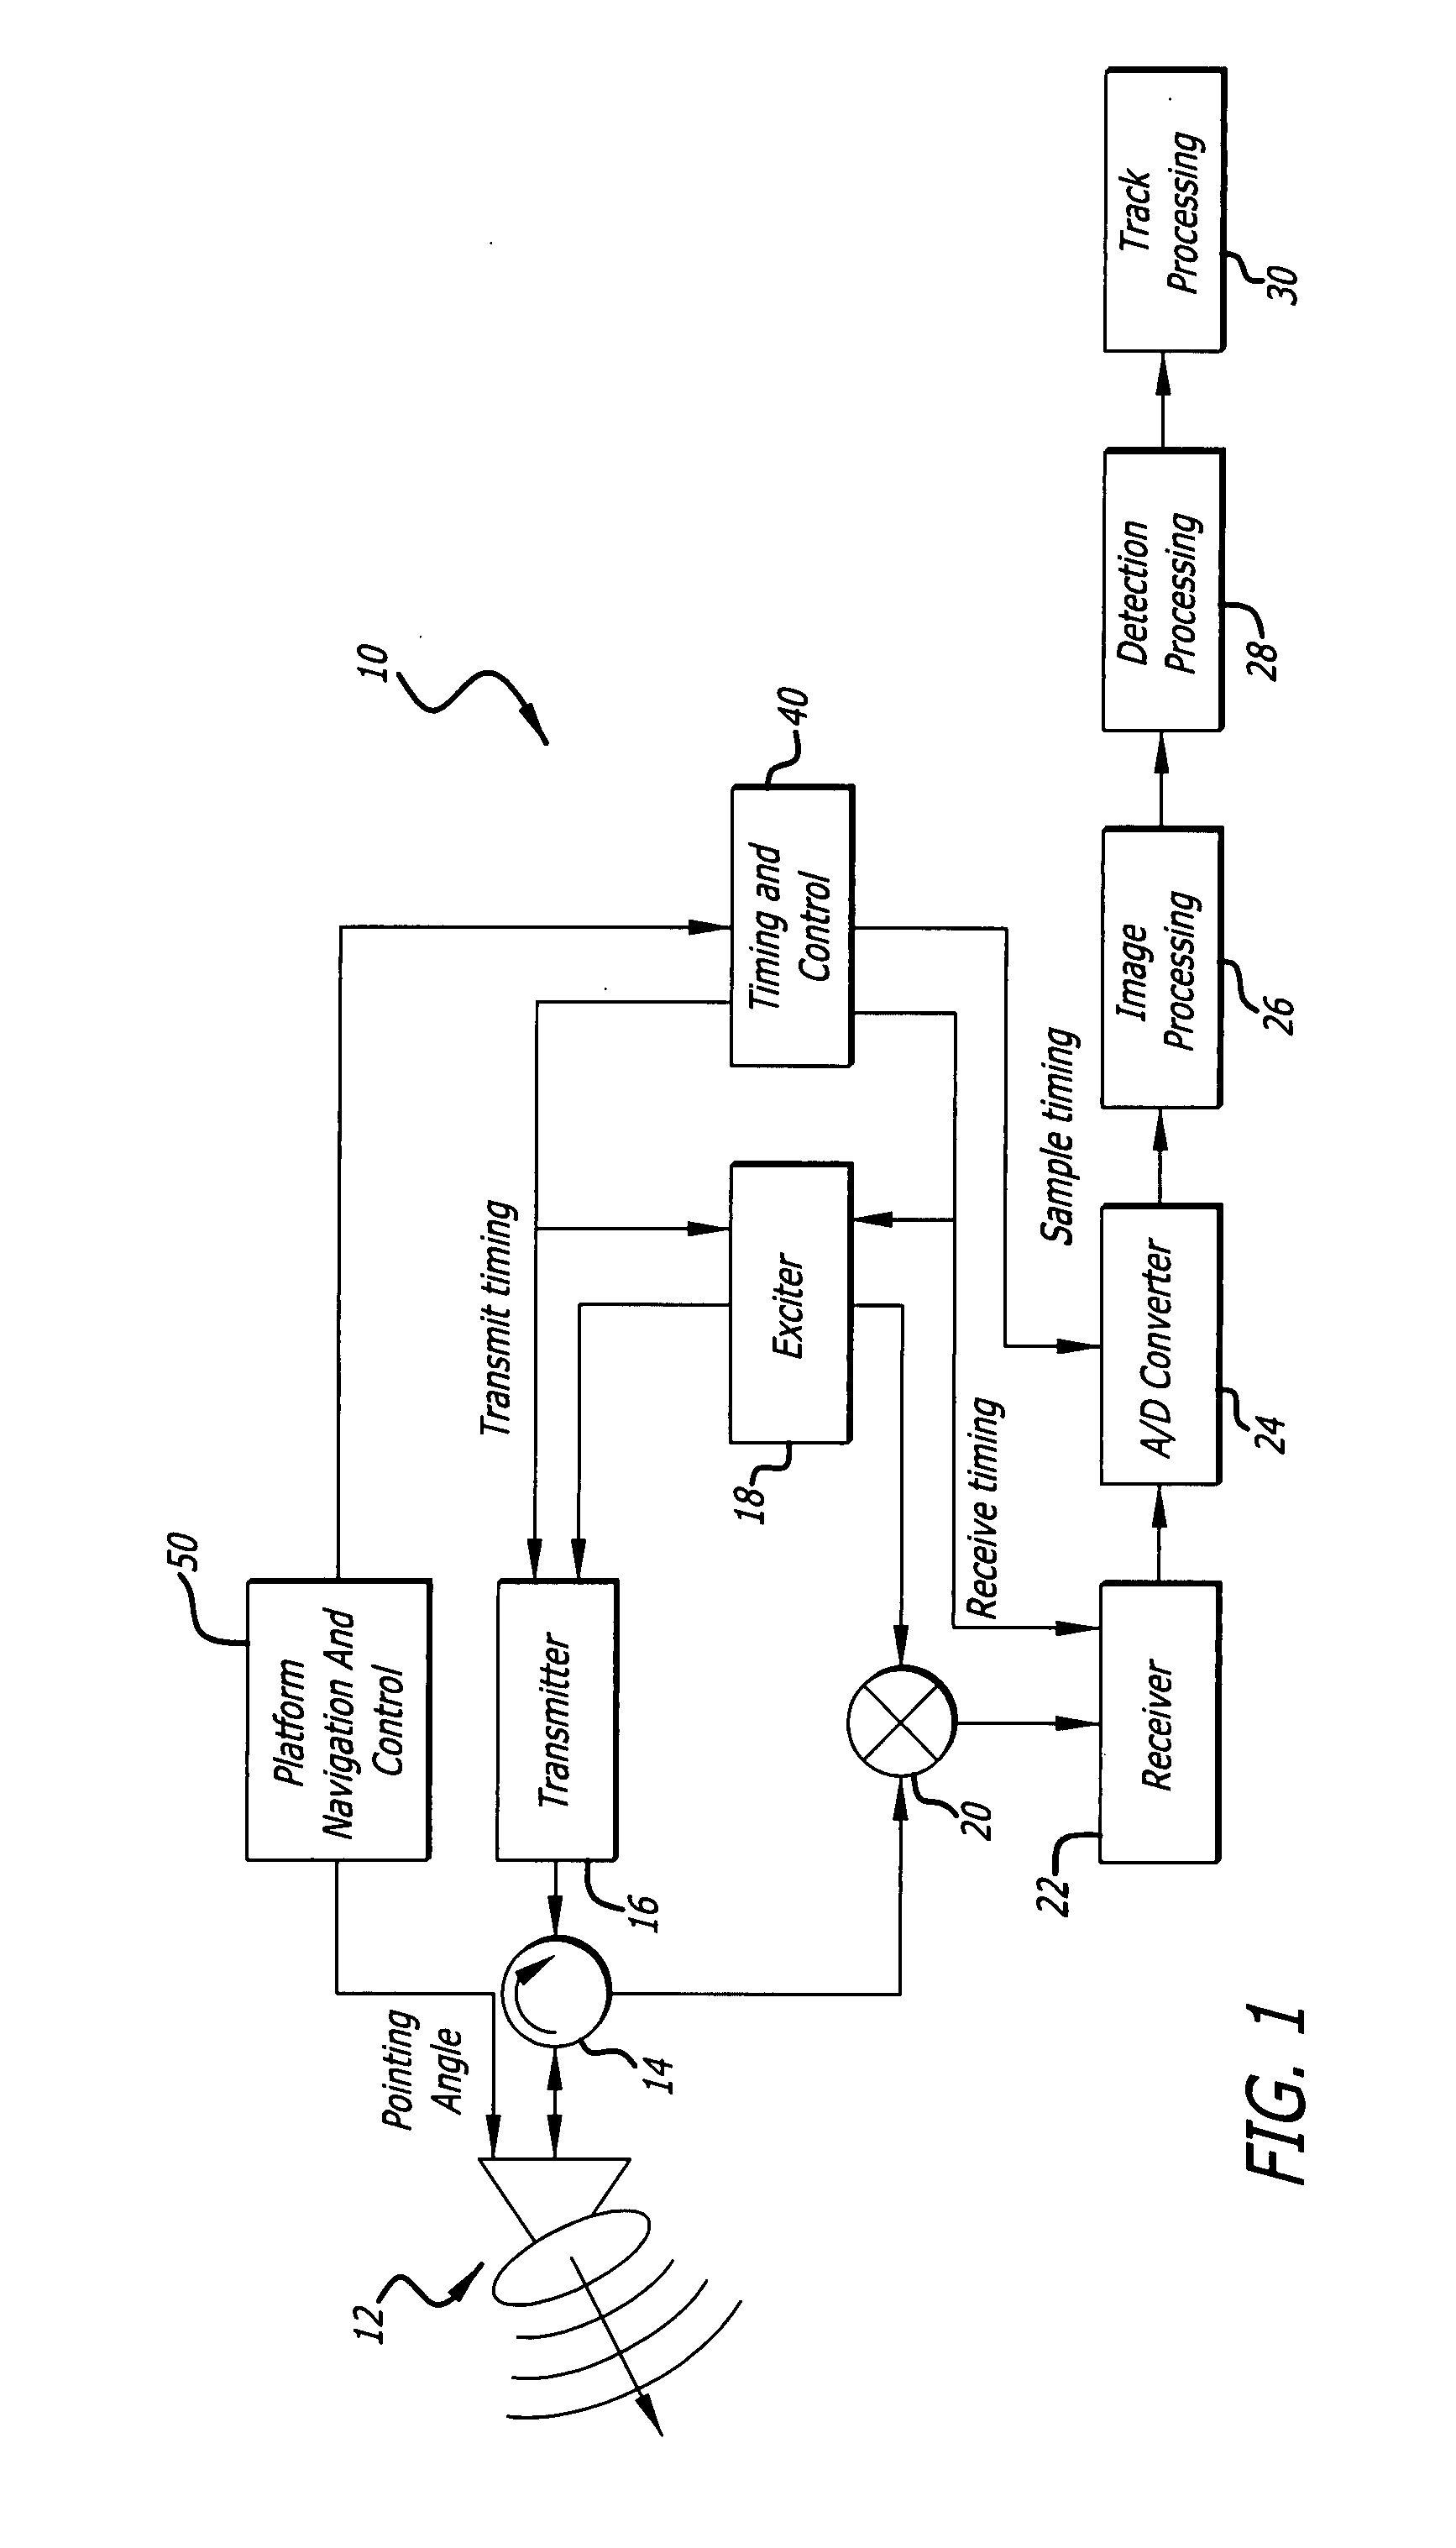 Radar imaging system and method using second moment spatial variance